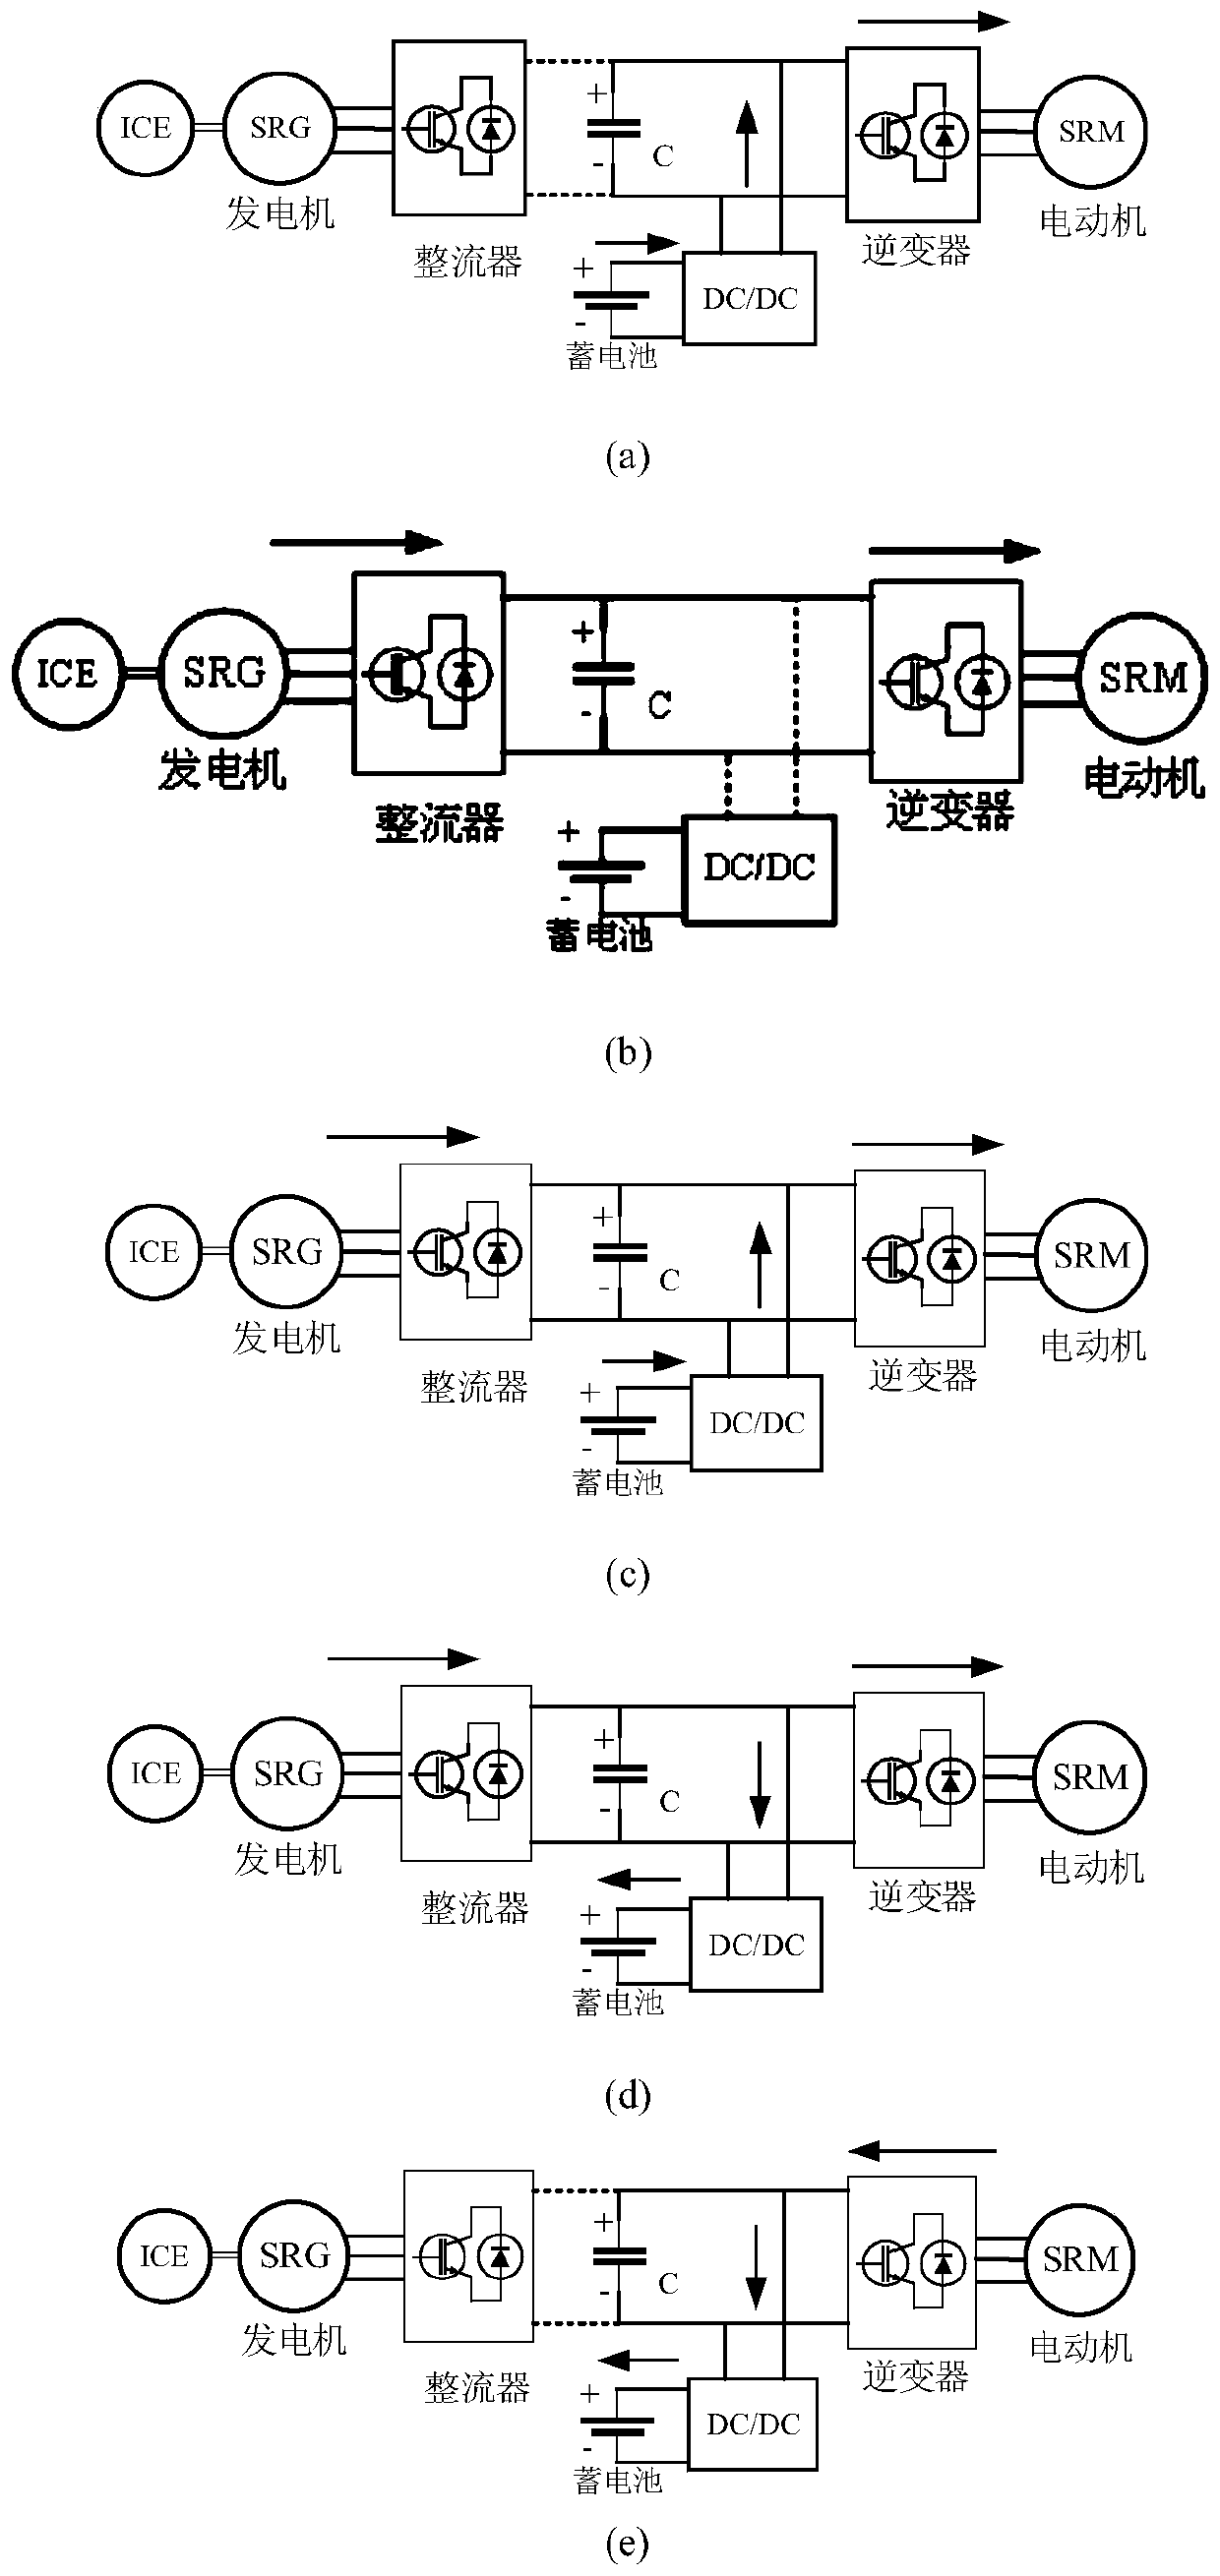 Switched reluctance motor transmission system of plug-in hybrid electric vehicle